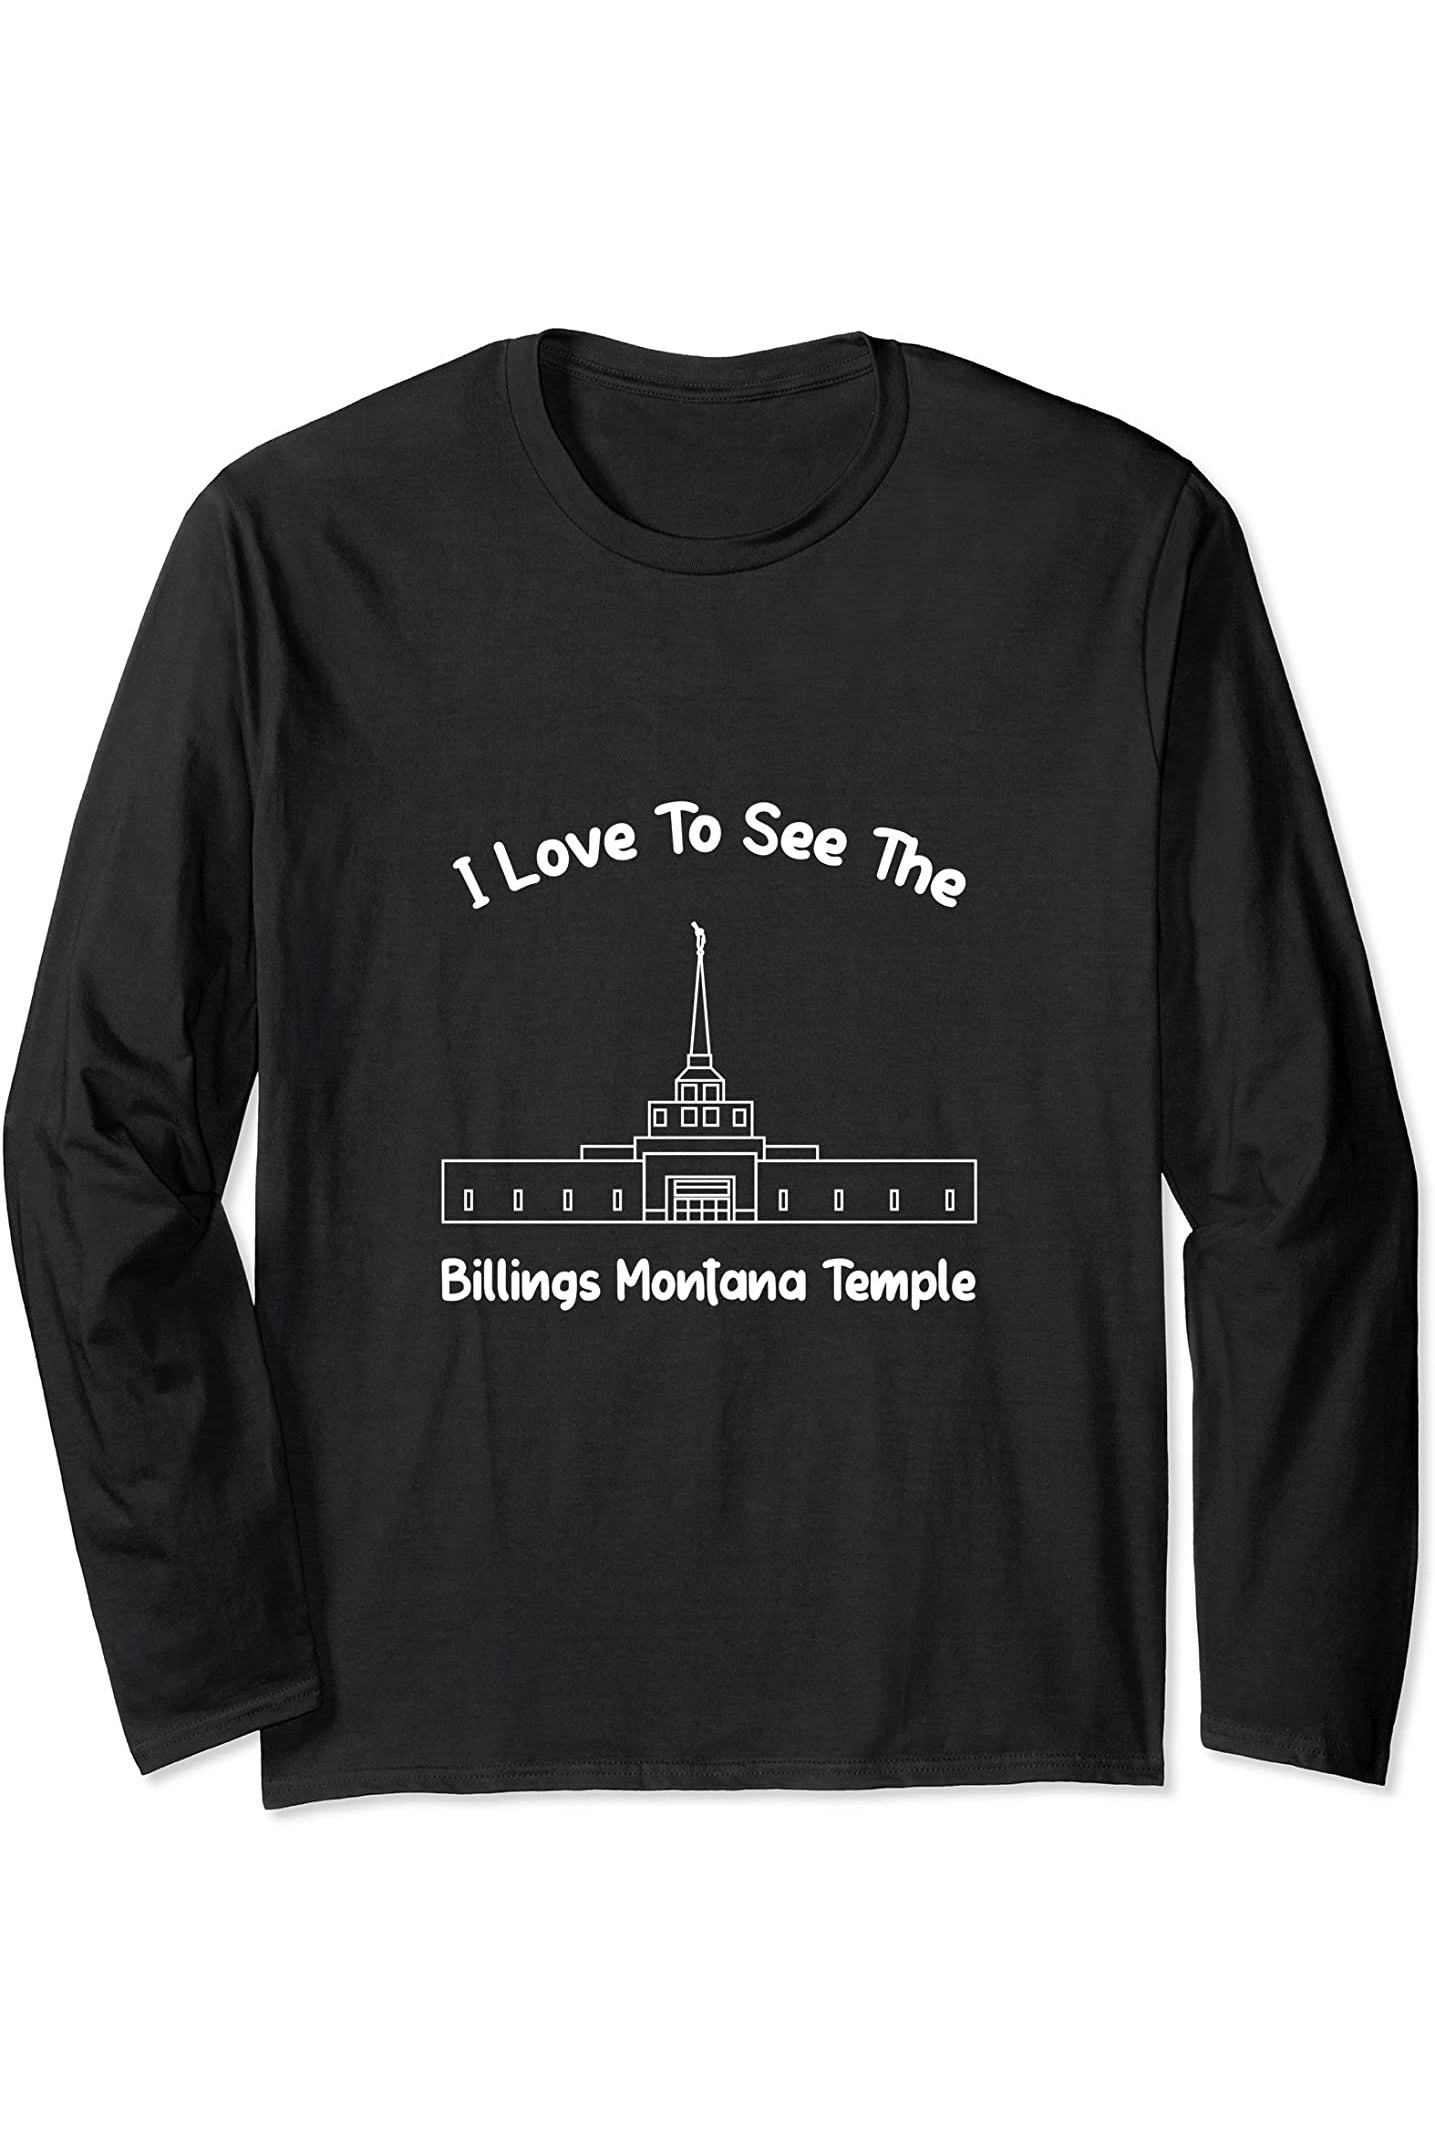 Billings Montana Temple Long Sleeve T-Shirt - Primary Style (English) US